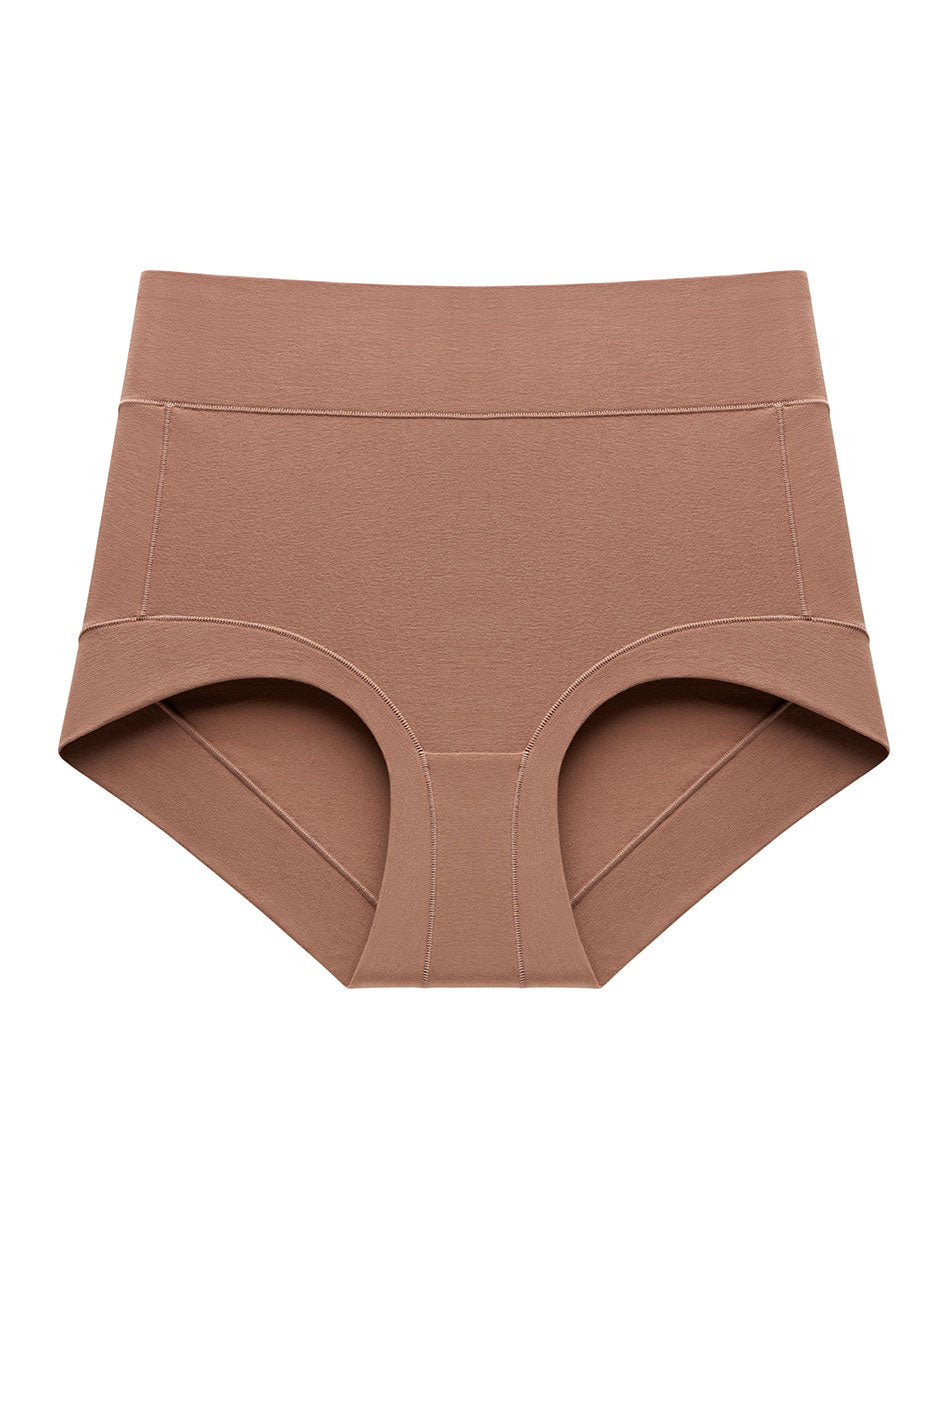 https://cdn.shopify.com/s/files/1/0528/2961/8334/products/U00710025-PIMA-COTTON-ULTRA-HIGH-RISE-BRIEF-Amber-Front.jpg?v=1685732659